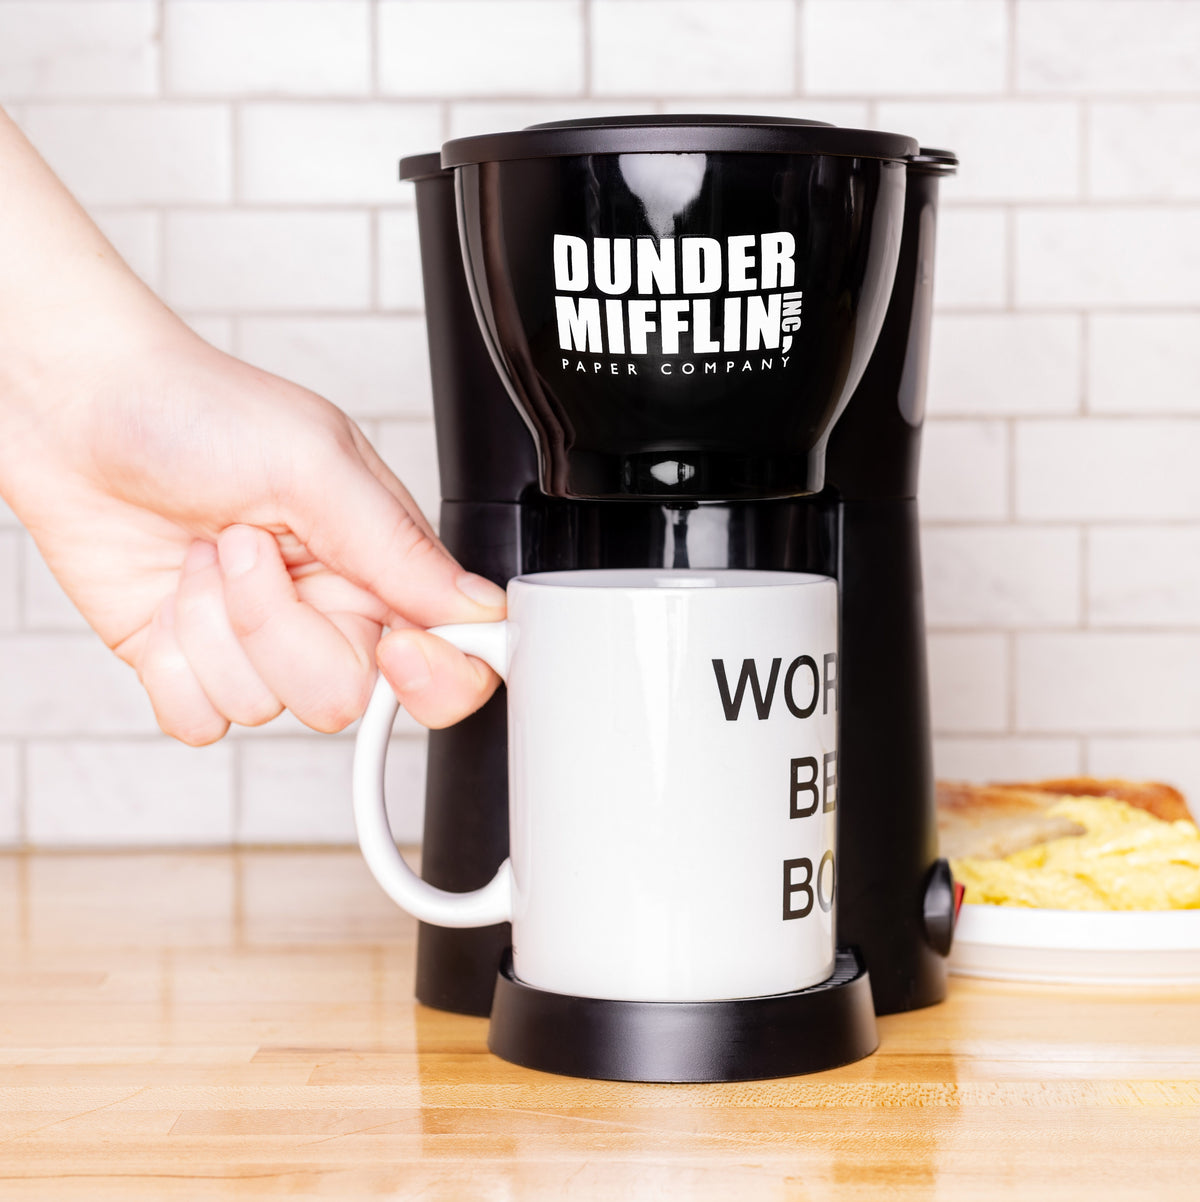 Invest in the Best Office Coffee Maker for your Cubicle